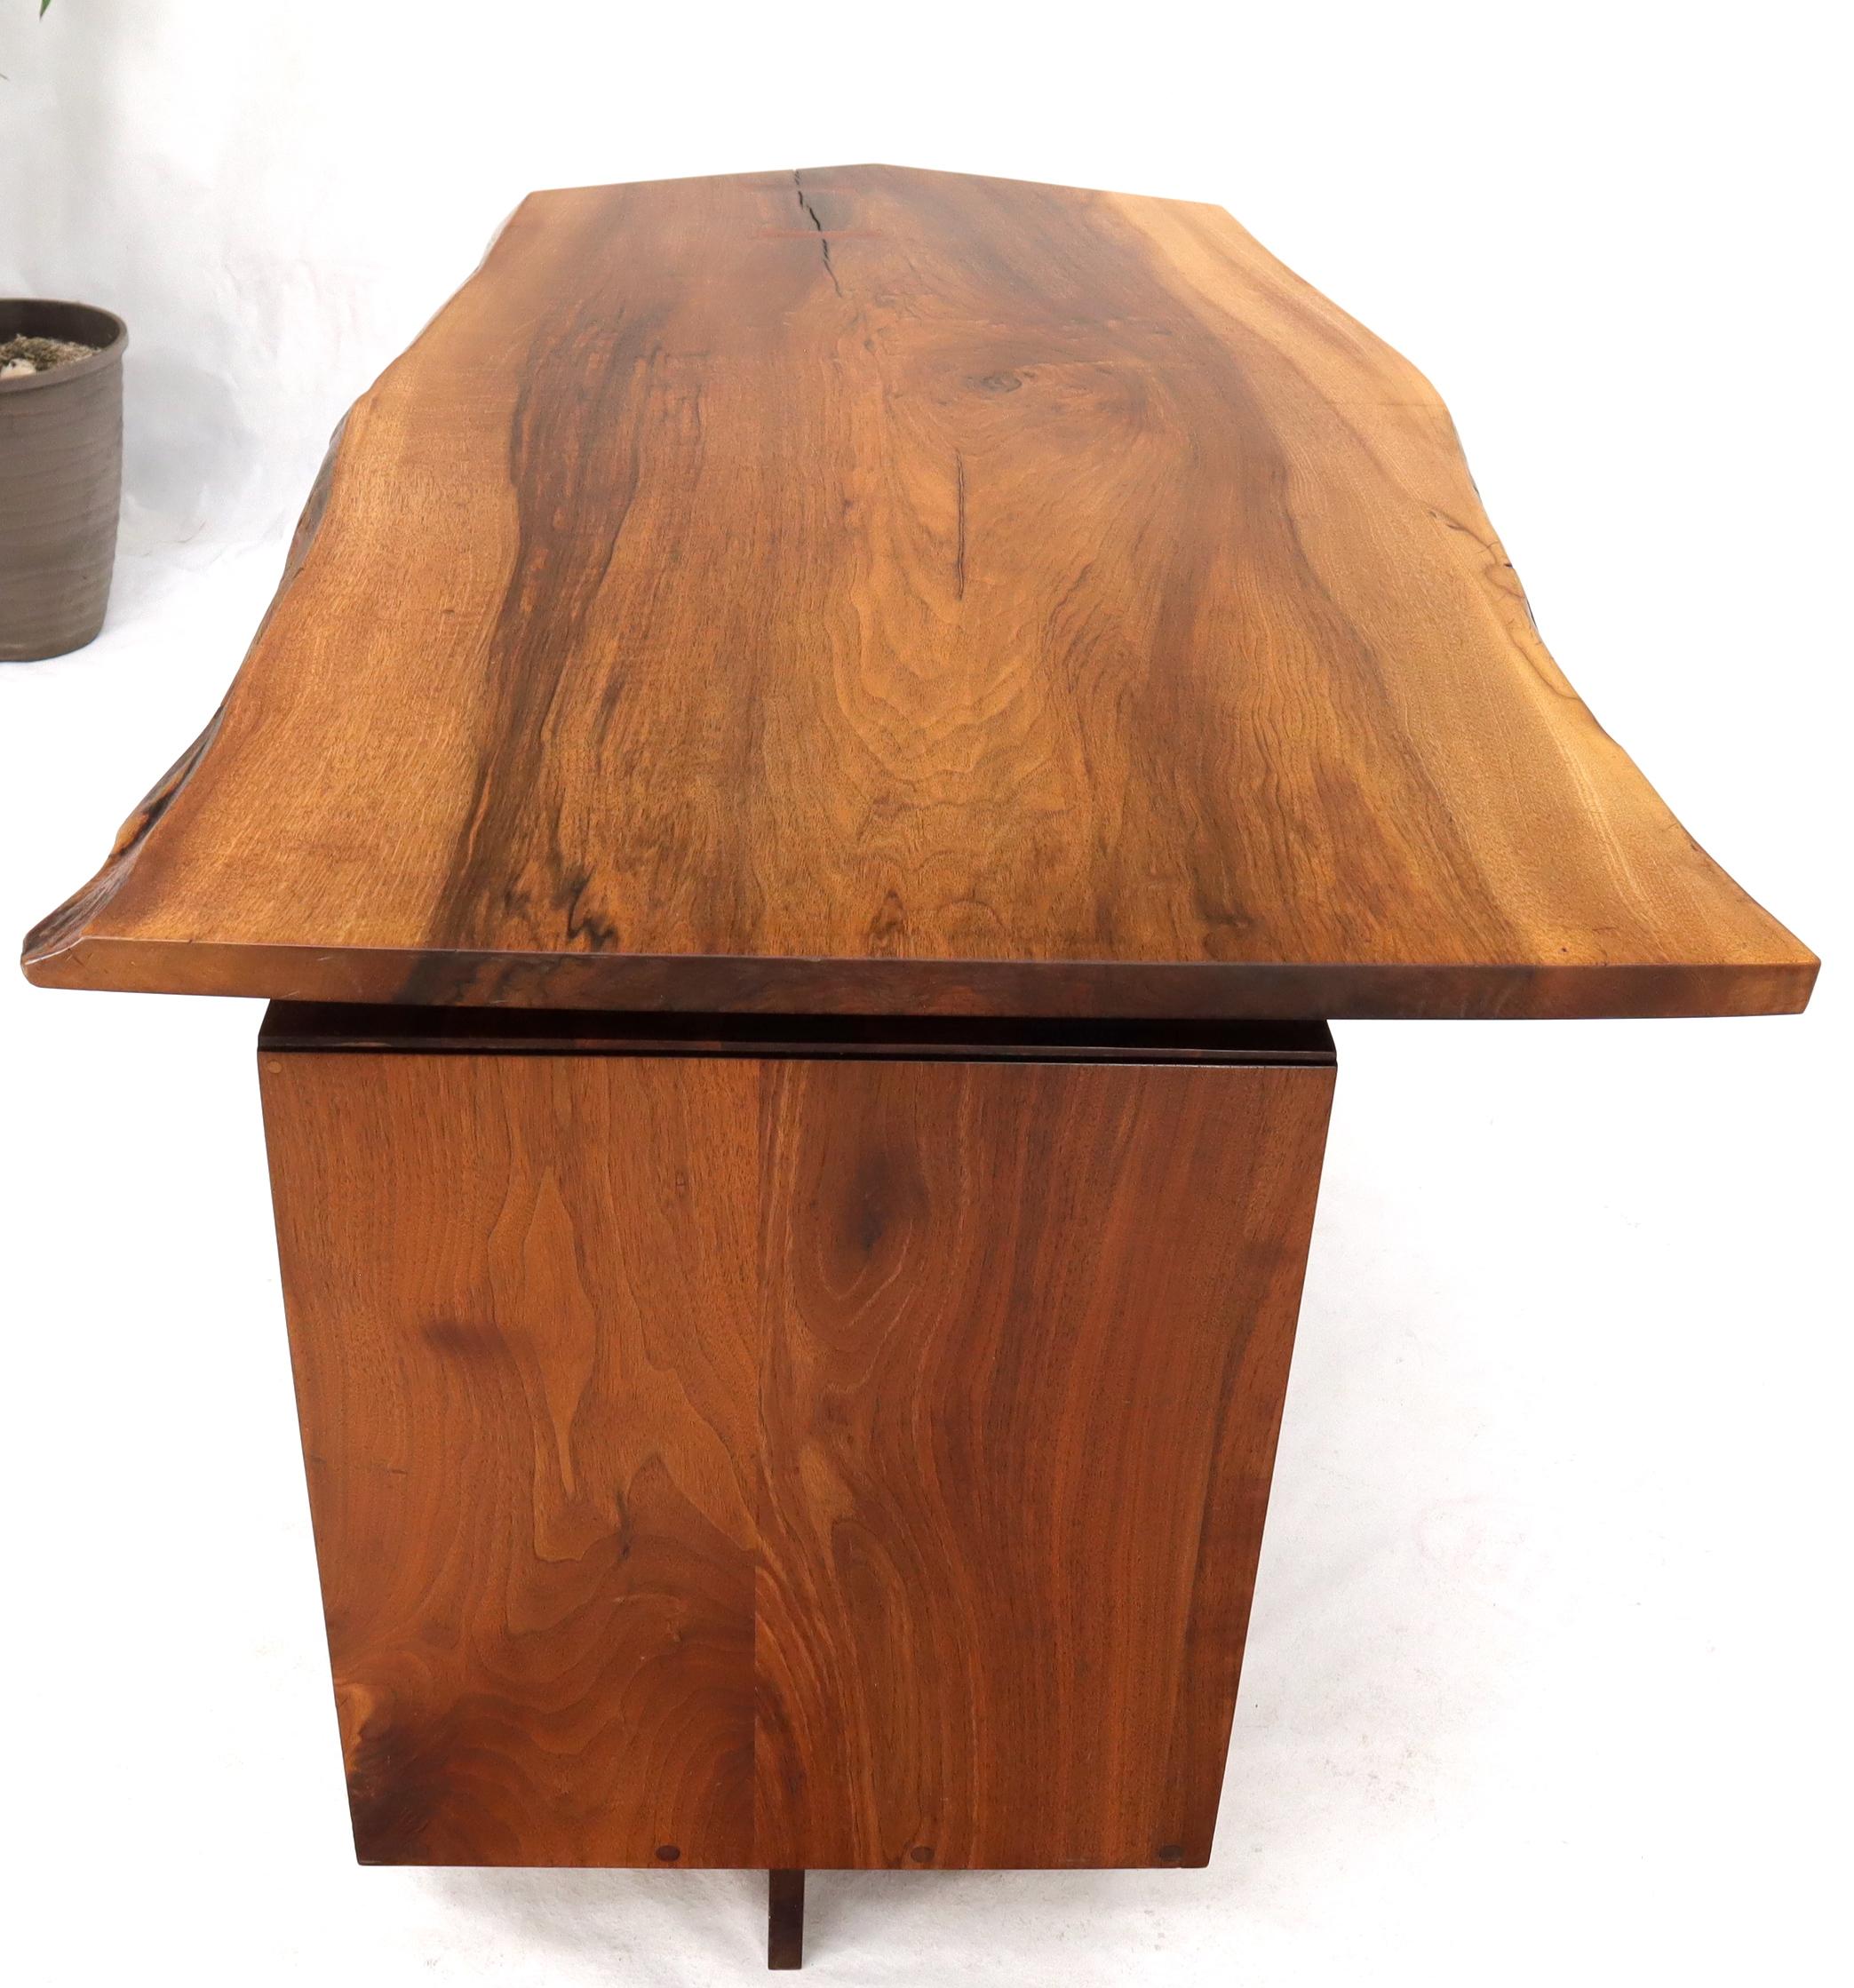 20th Century Conoid Cross Leg Desk in Walnut by George Nakashima Dated Documented, 1971 For Sale